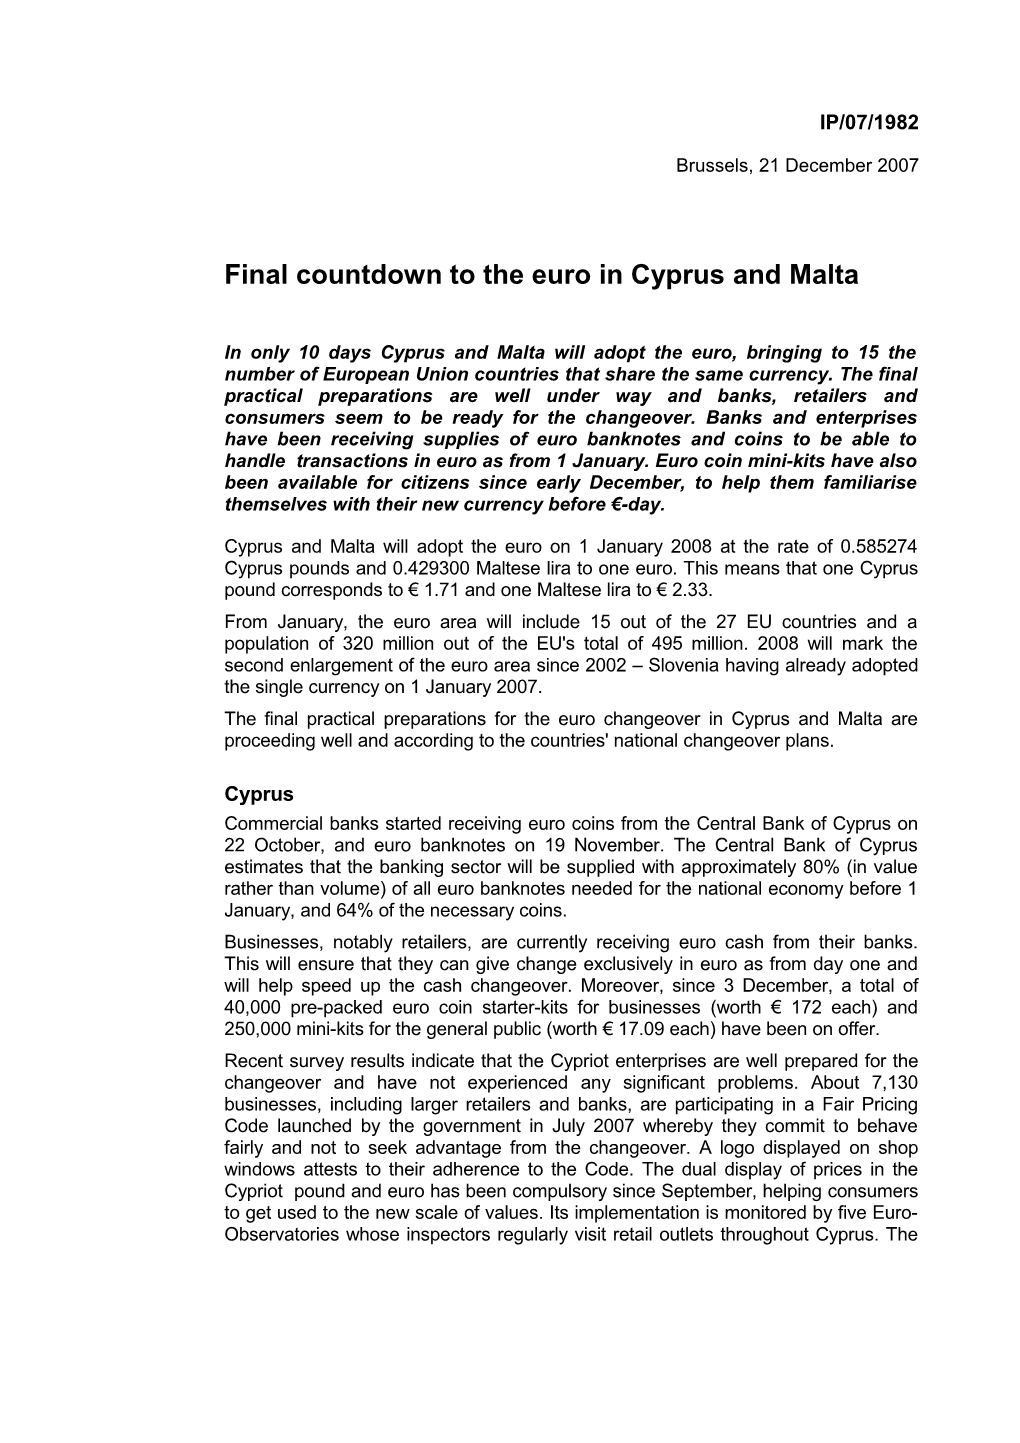 Final Countdown to the Euro in Cyprus and Malta